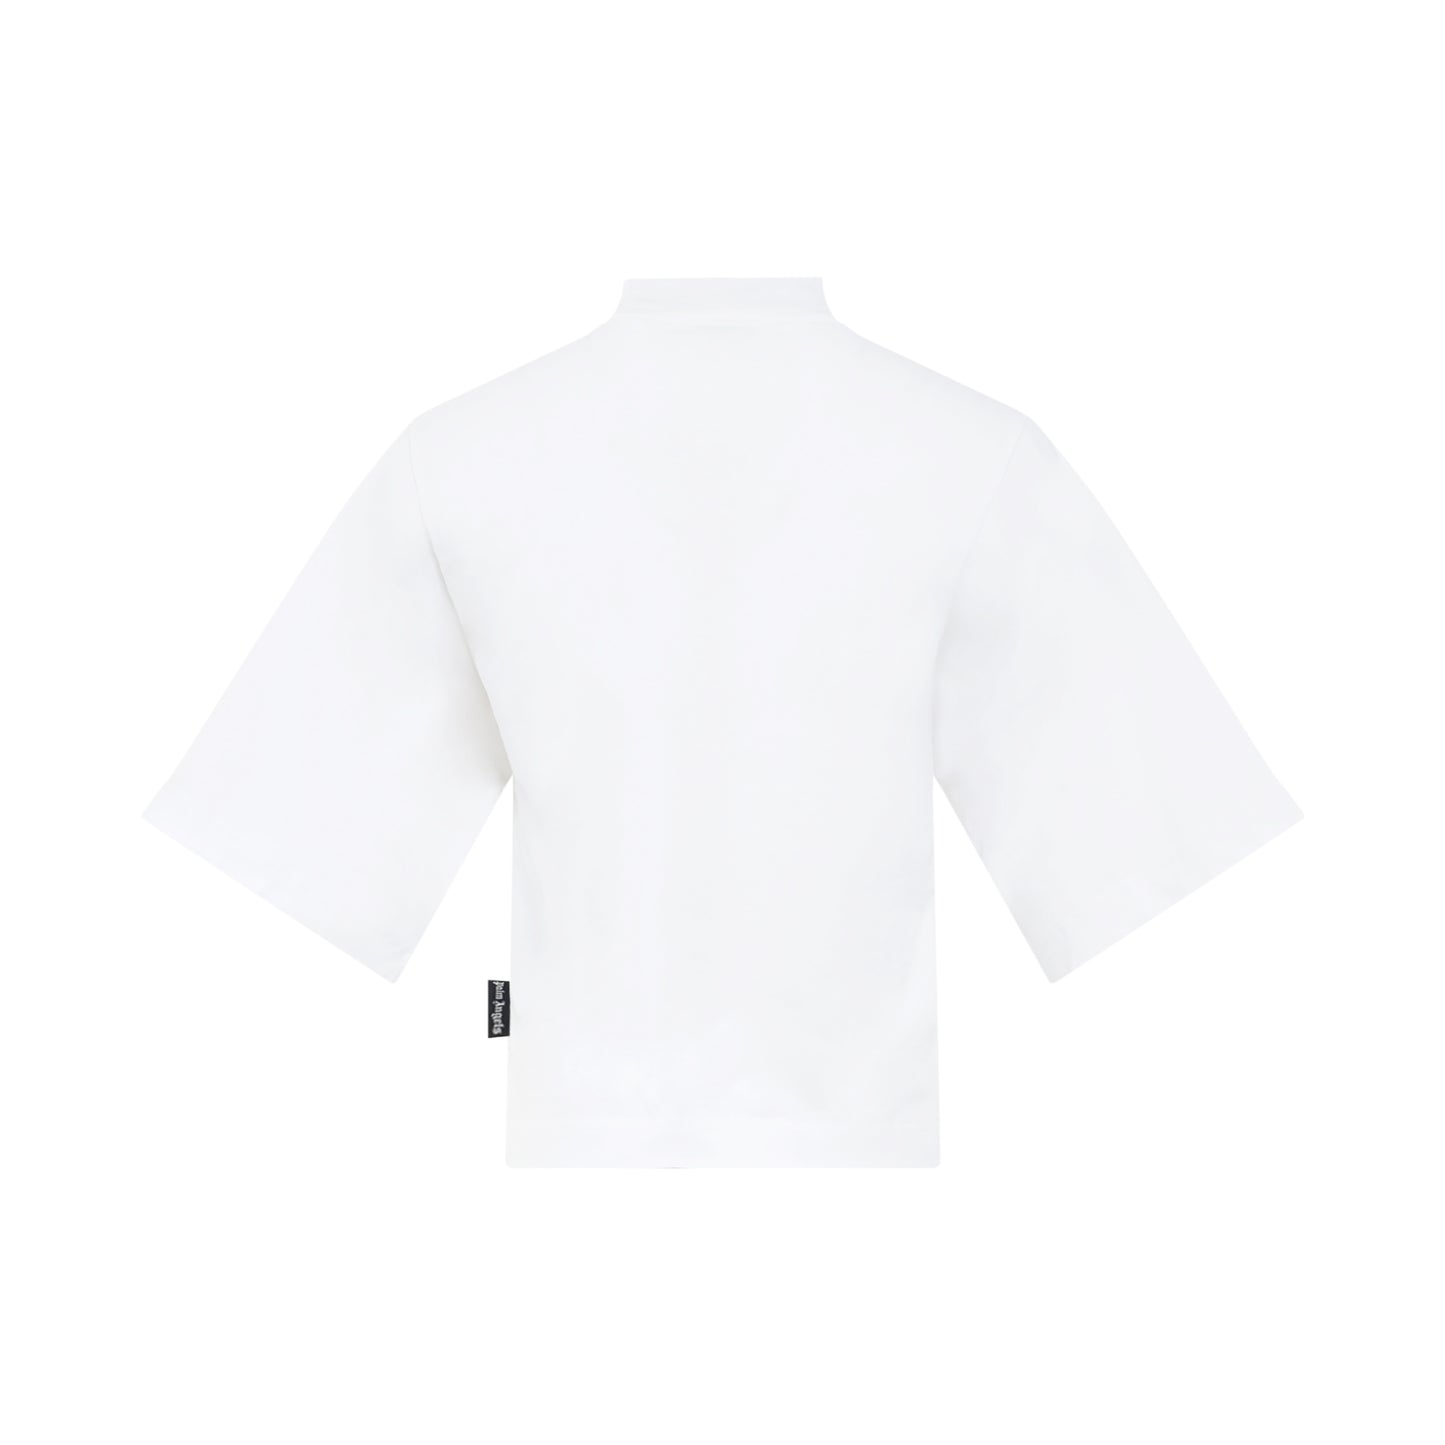 Wings Graphic Cotton T-Shirt in White/Black